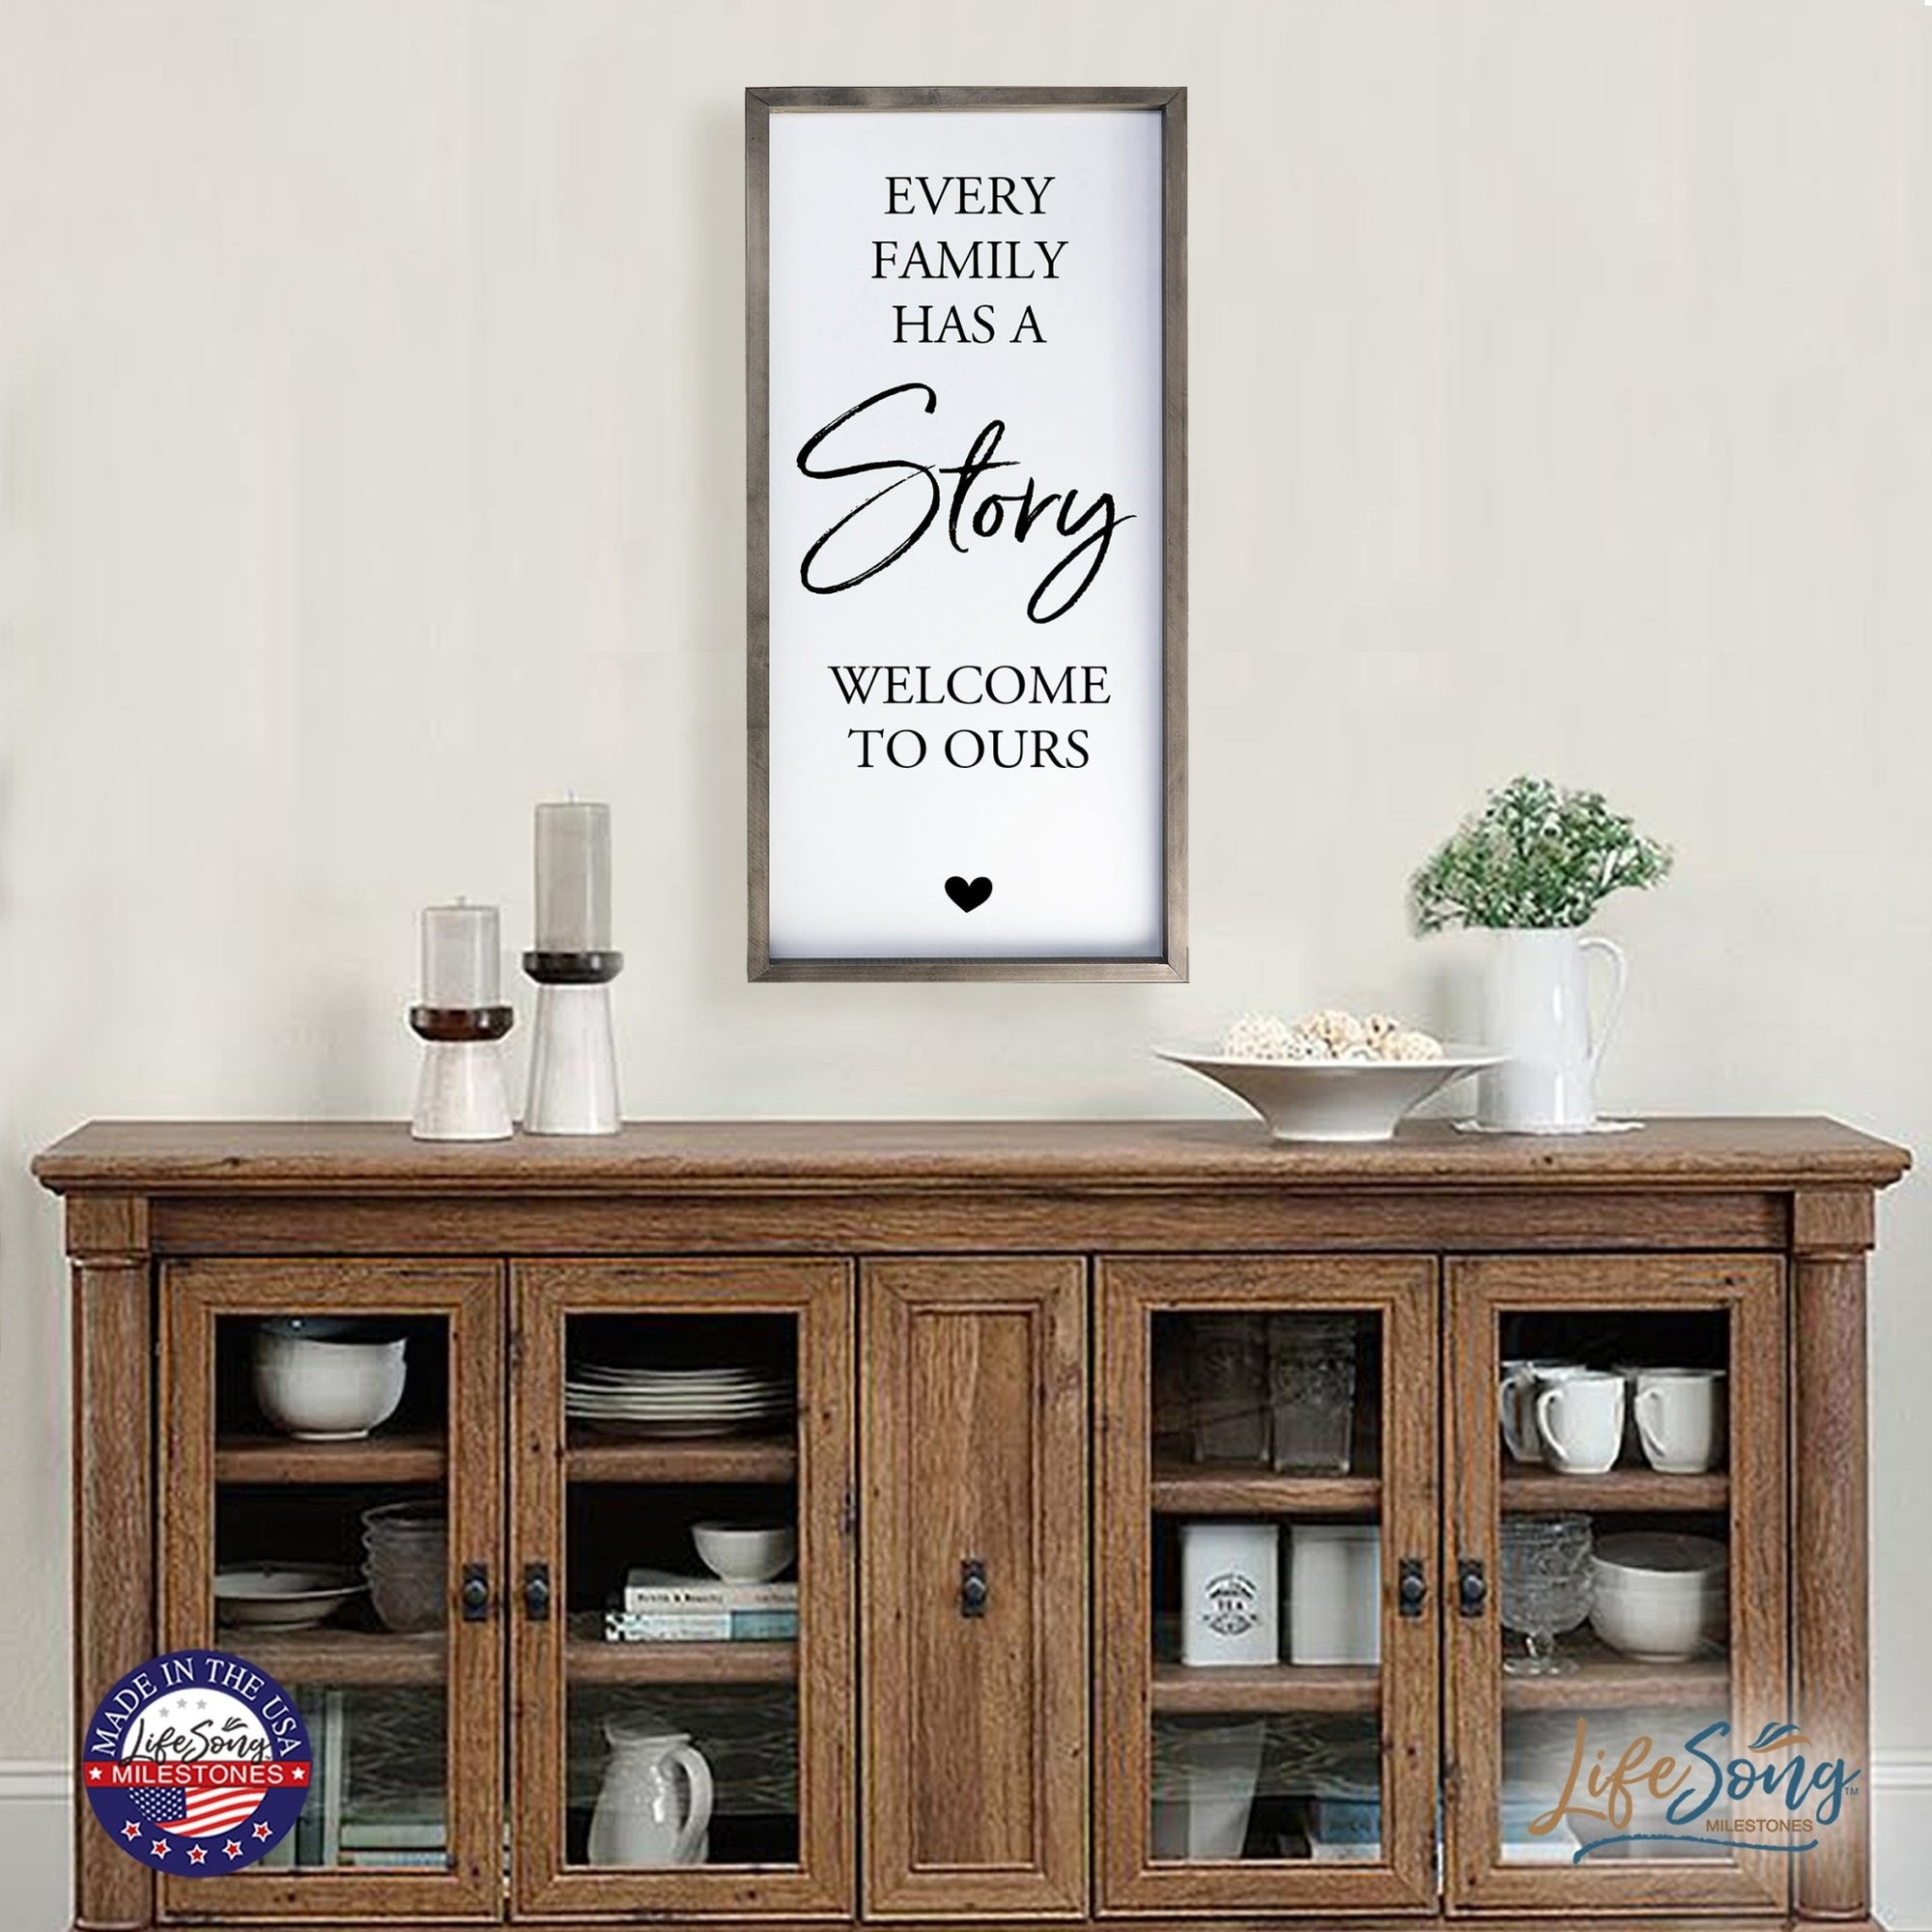 Large Family Wall Decor Quote Sign For Home 18 x 36 - Every Family Has A Story - LifeSong Milestones